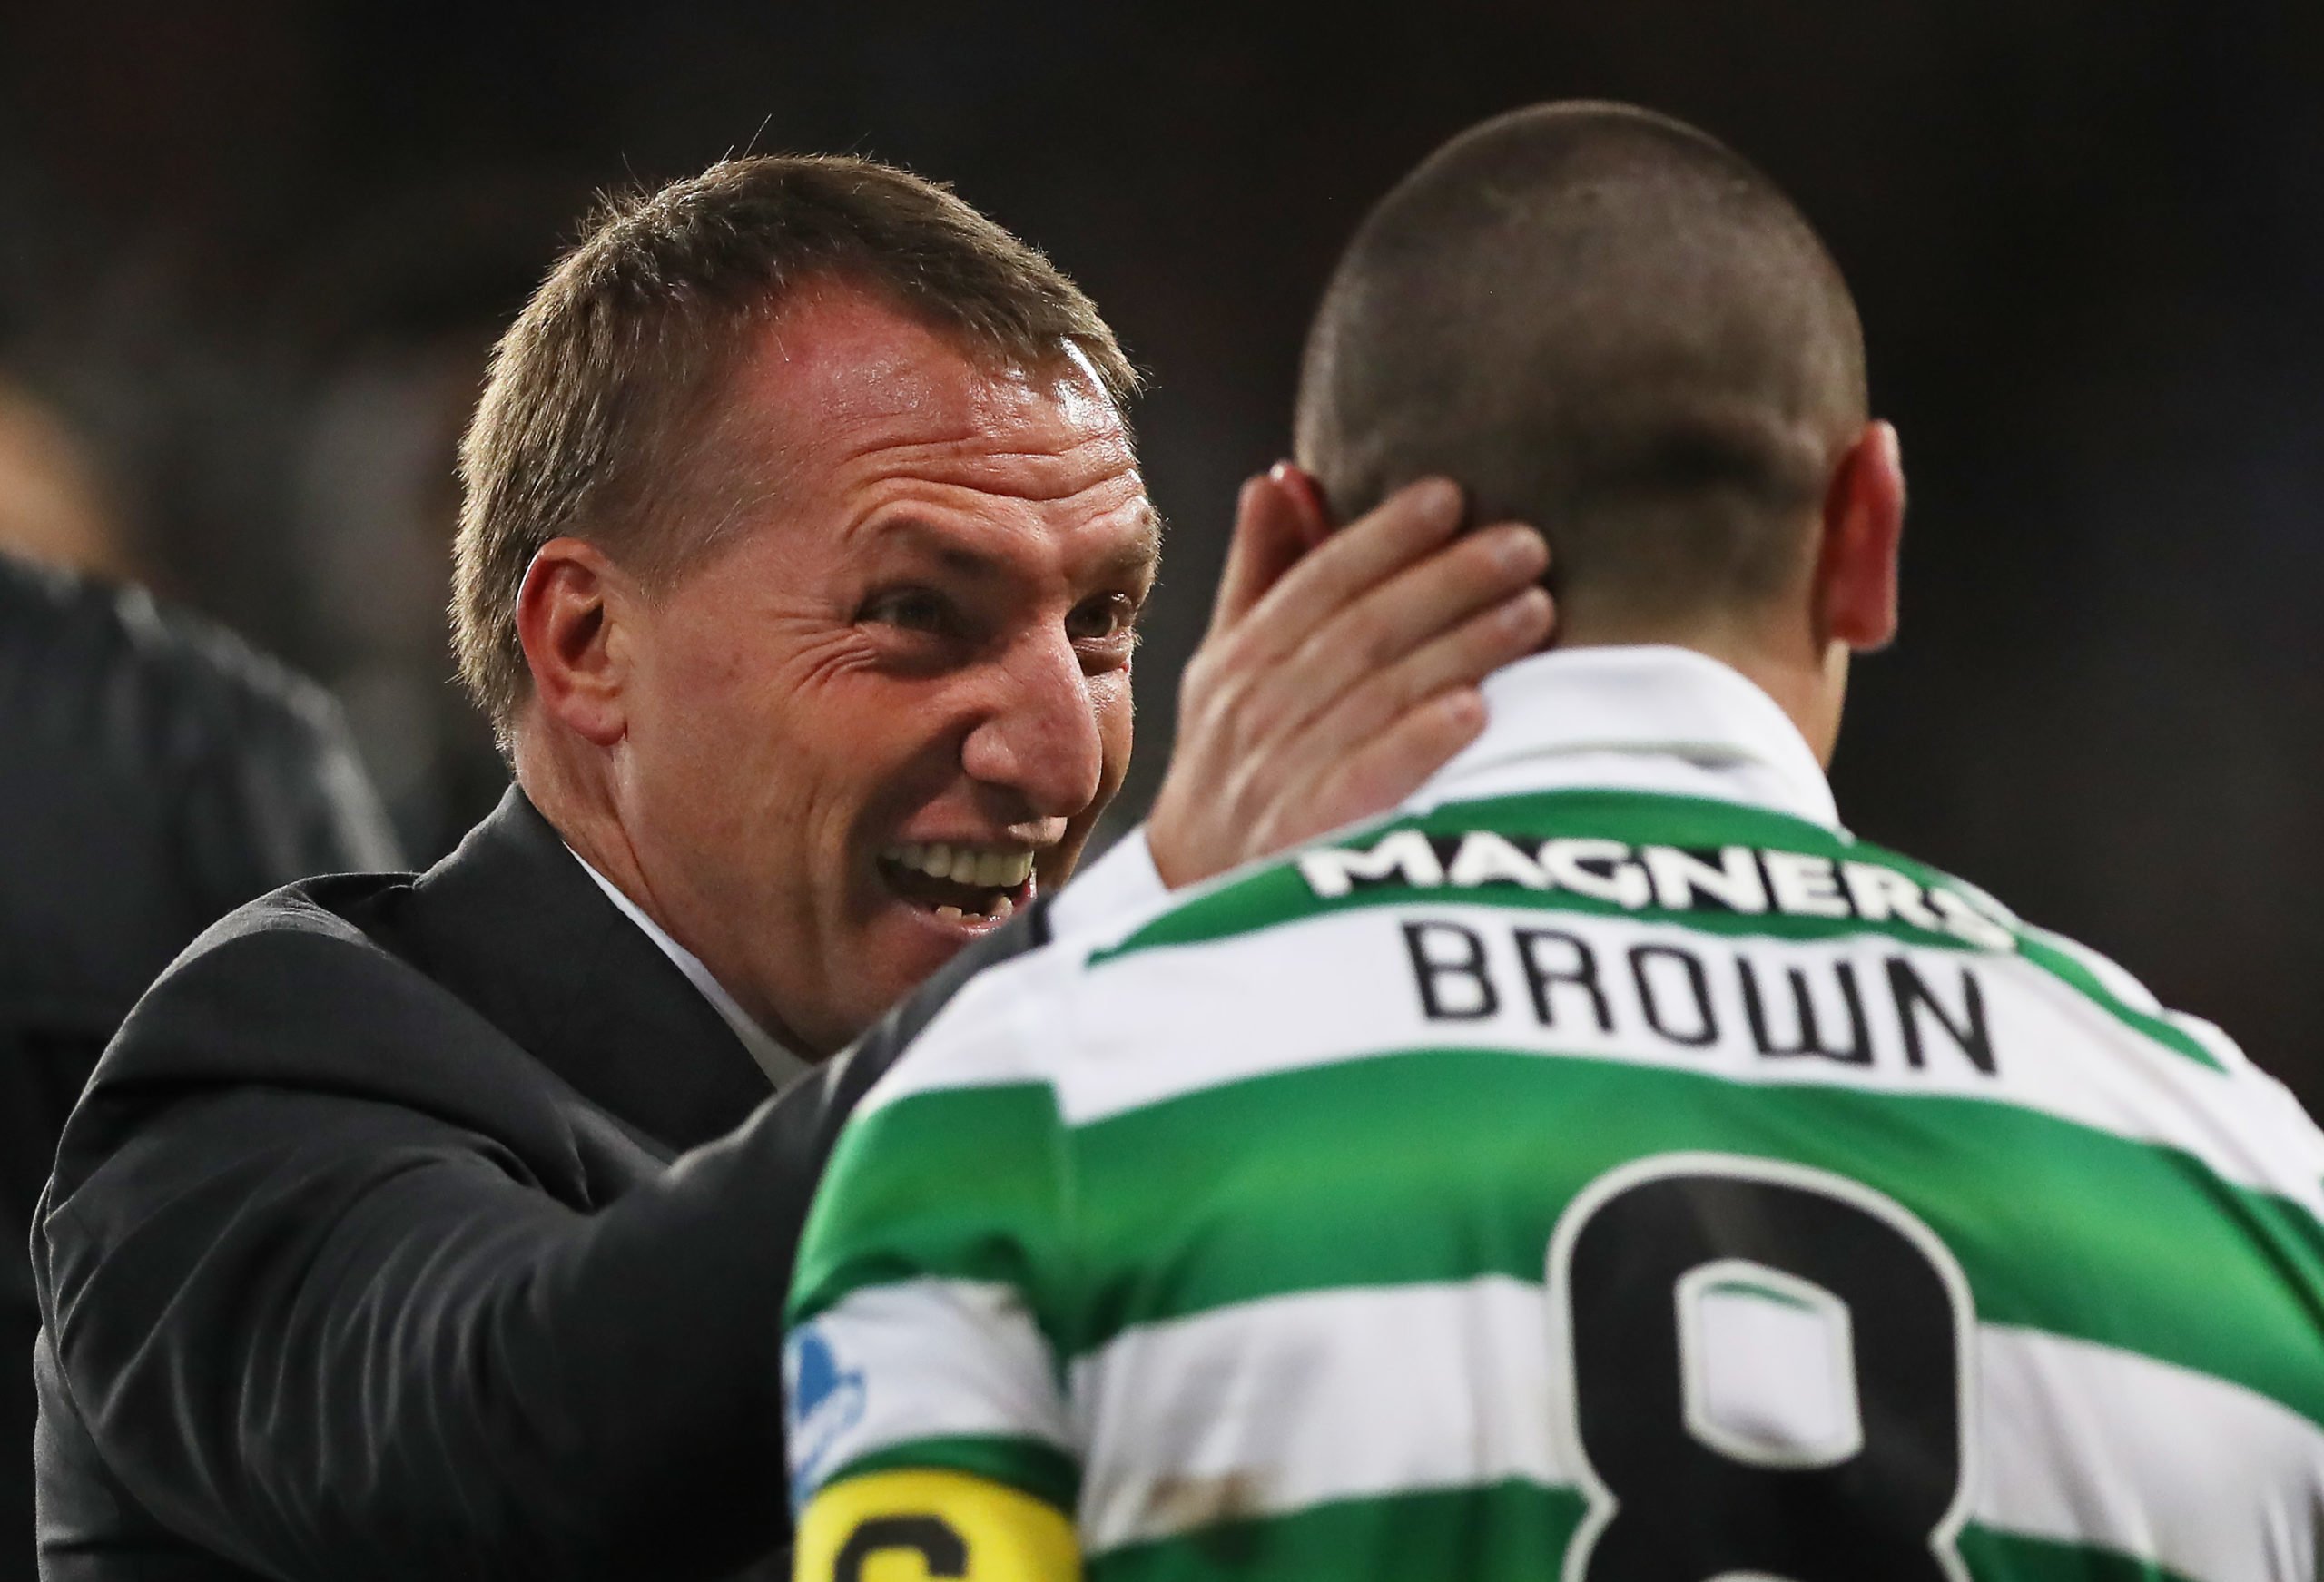 Brendan Rodgers claims Celtic captain Scott Brown will be back one day